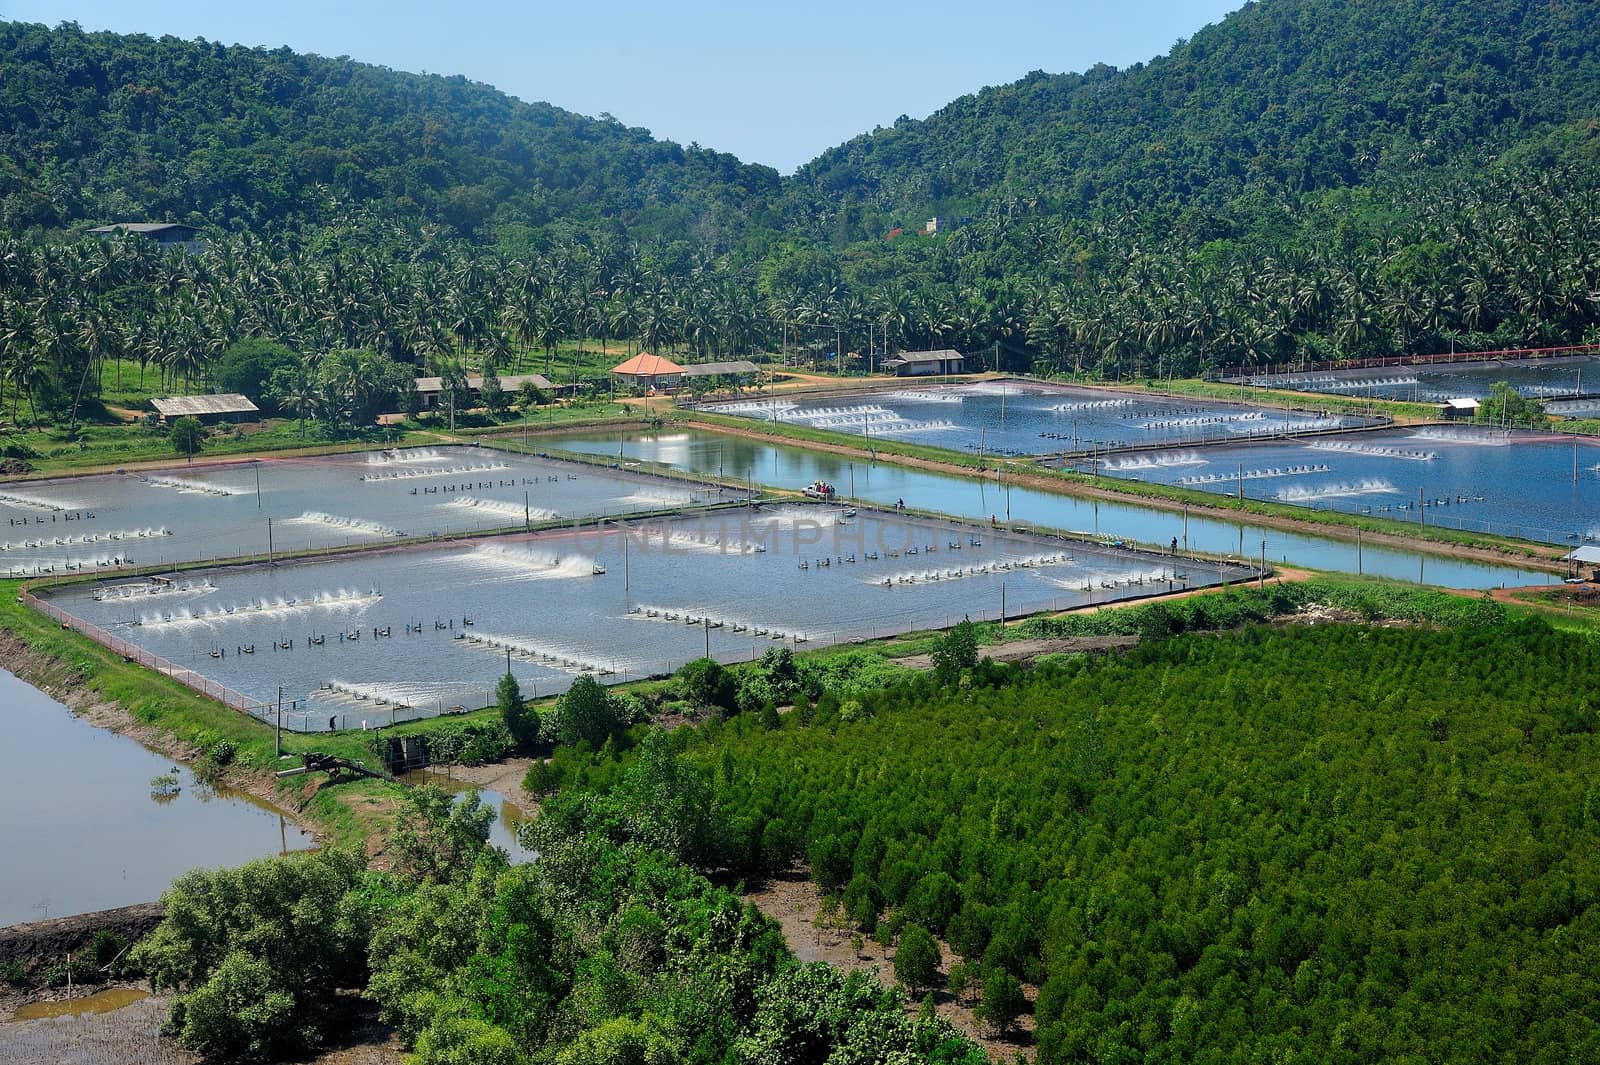 The Shrimp farming in thailand from aerial view. by think4photop